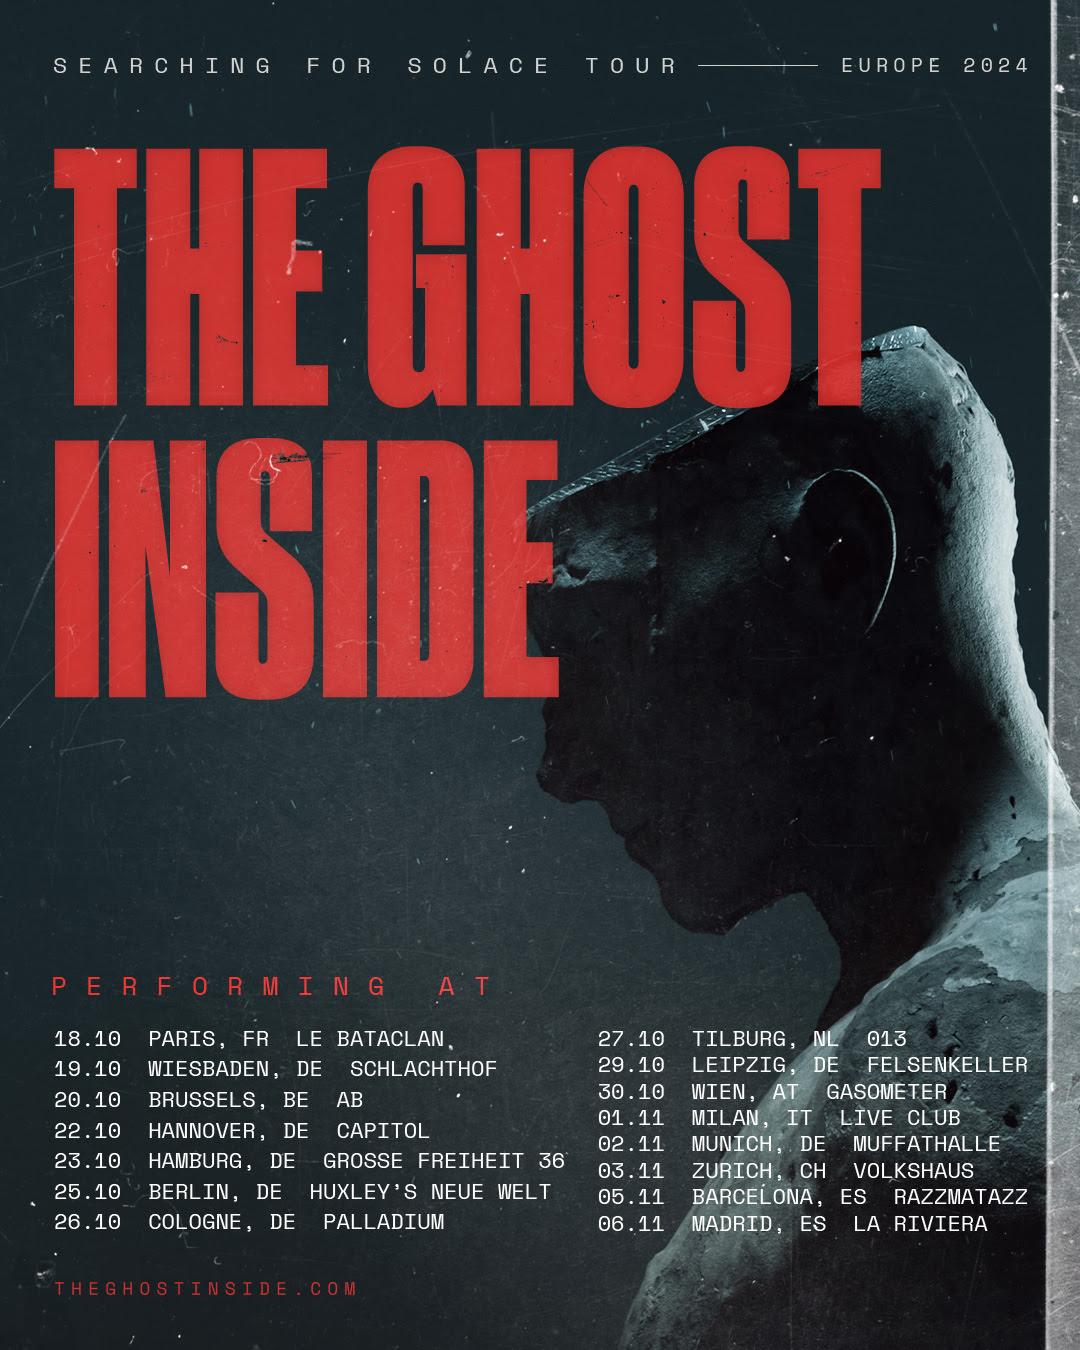 The ghost inside tour 2024